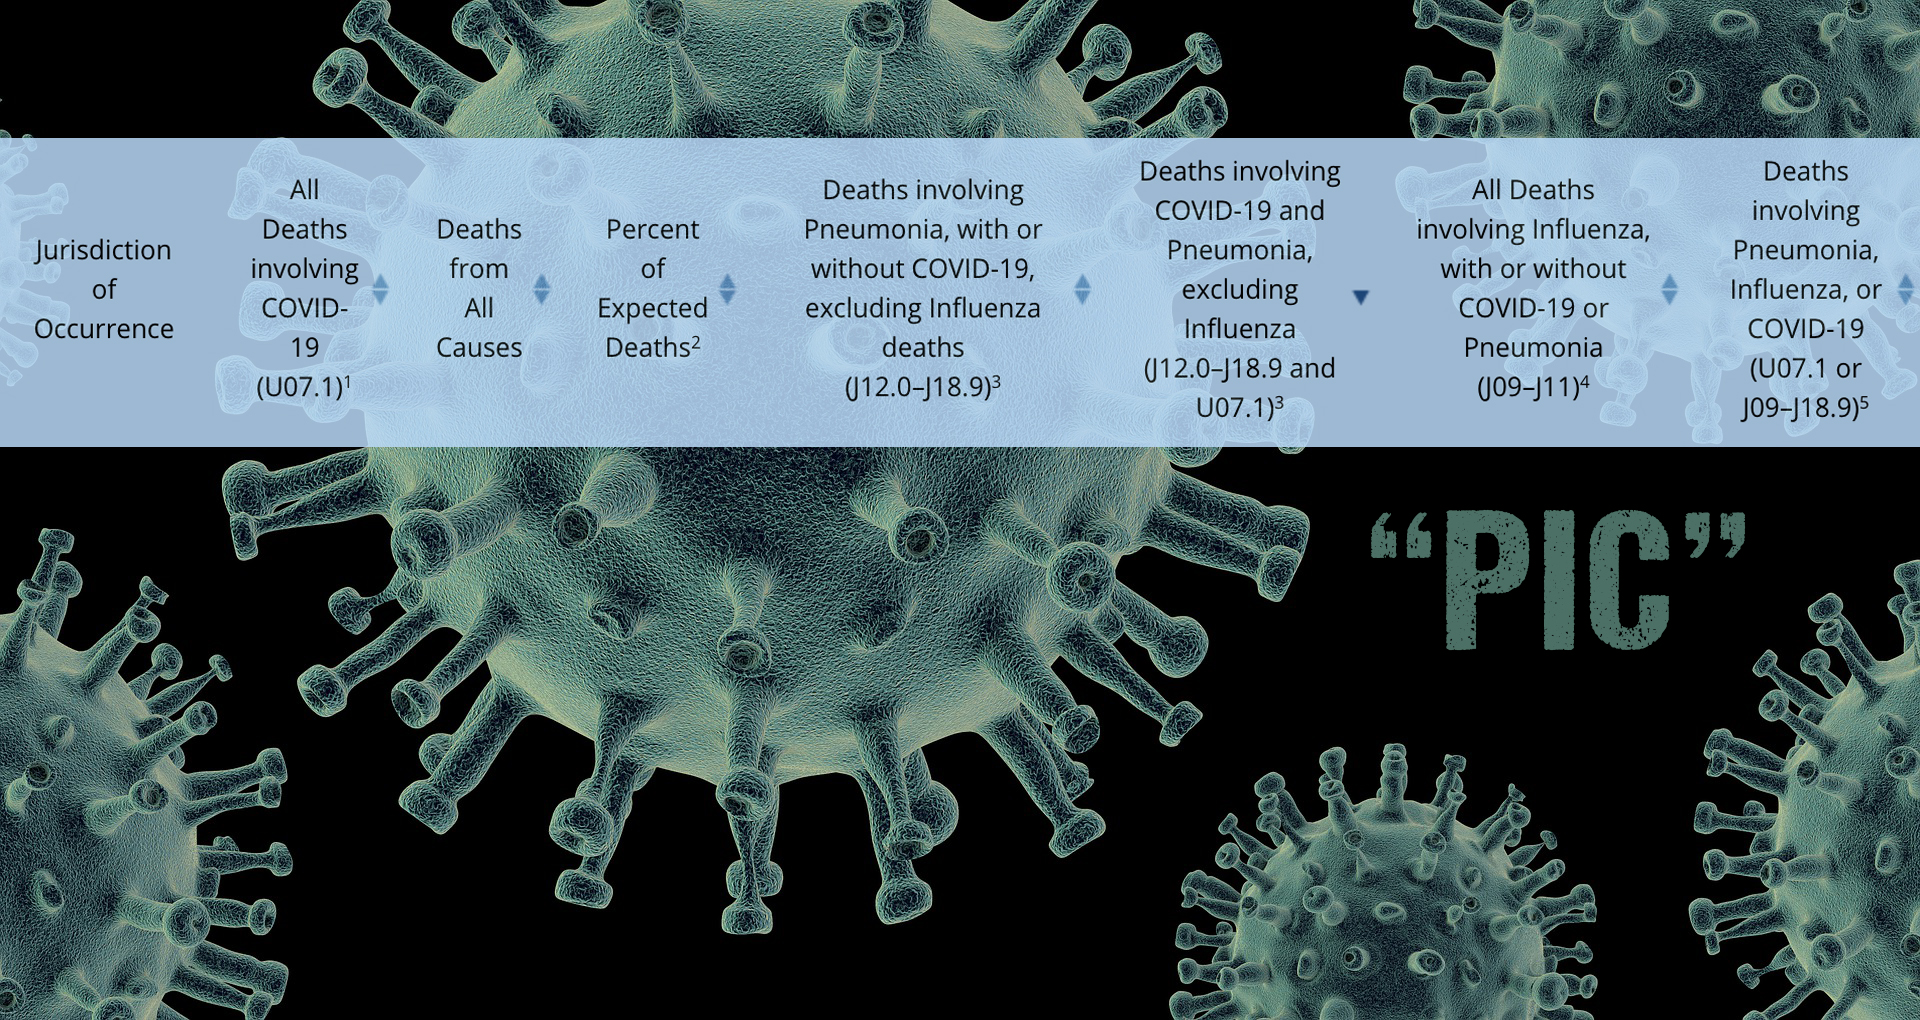 COVID-19 Pt. 2: CDC's New "PIC" and The Hidden Data | coreysdigs.com